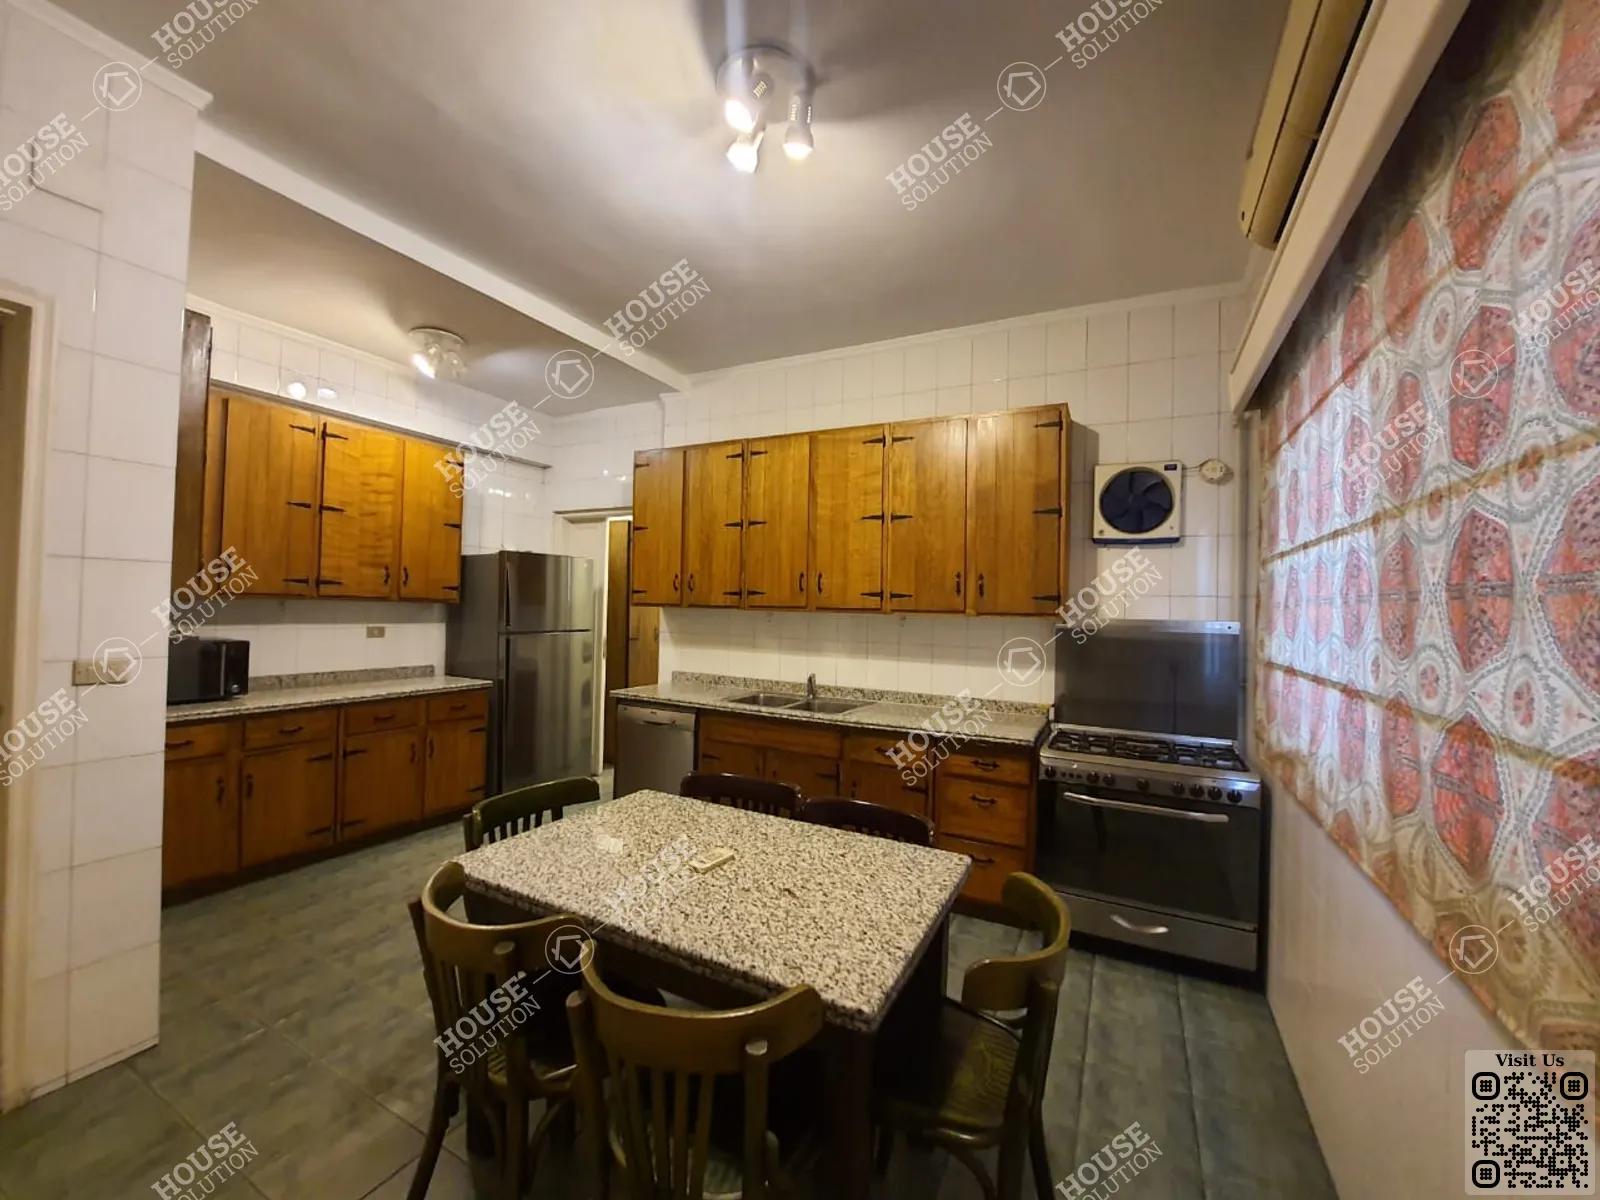 KITCHEN  @ Apartments For Rent In Maadi Maadi Degla Area: 300 m² consists of 4 Bedrooms 3 Bathrooms Furnished 5 stars #5139-1